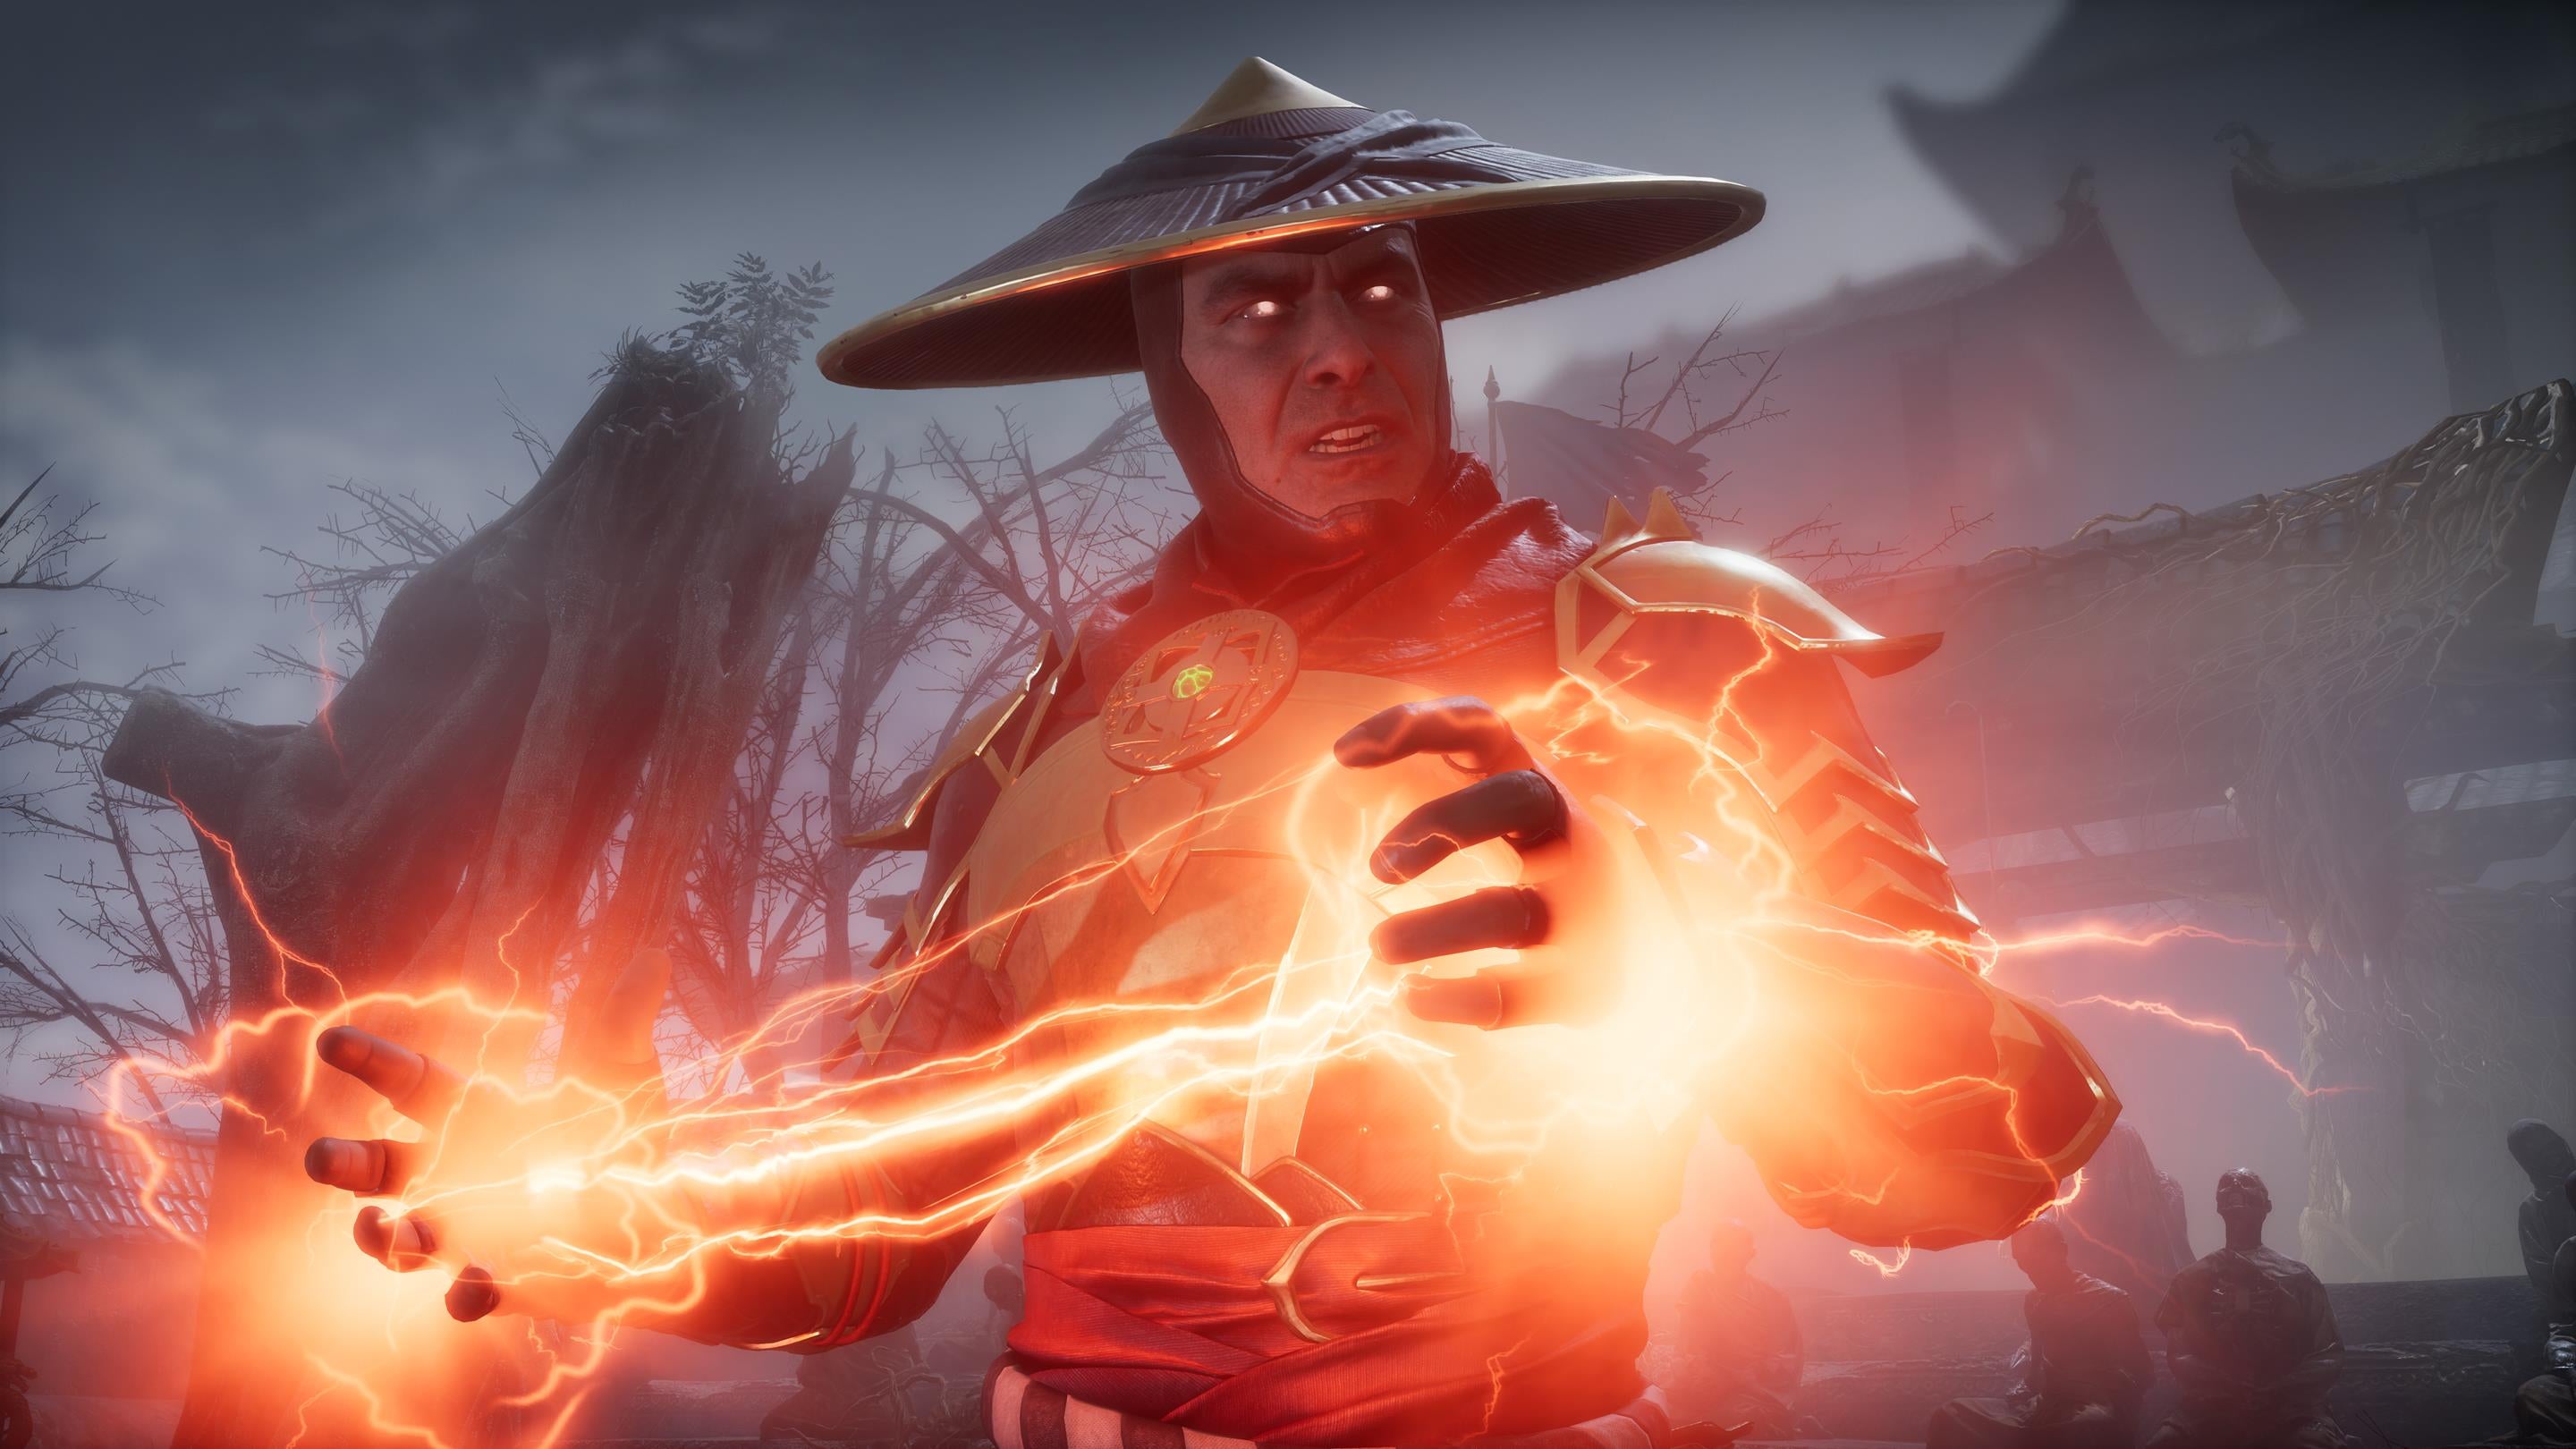 Image for Mortal Kombat 11, Final Fantasy 12 added to PlayStation Now for January